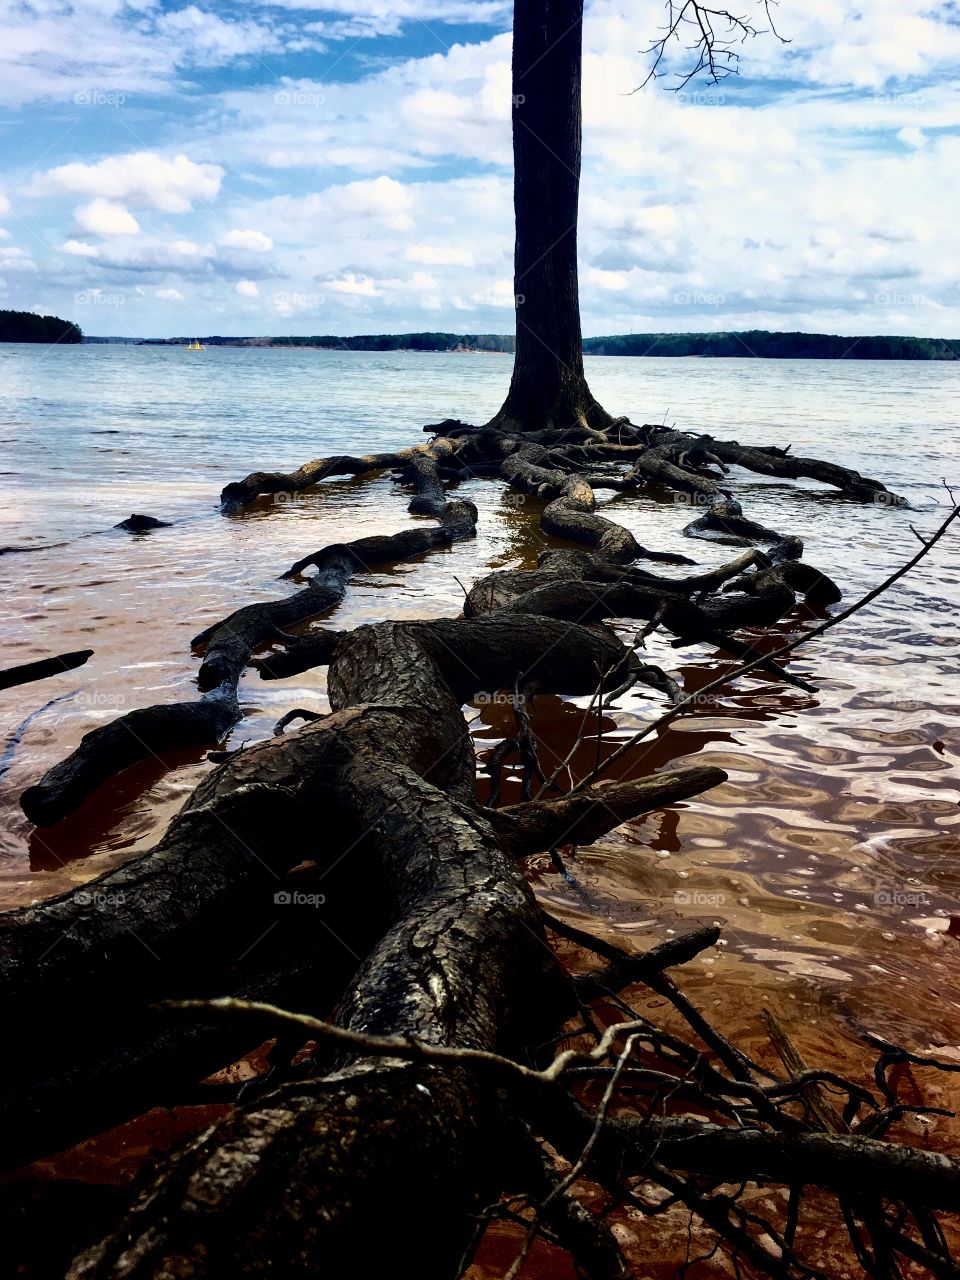 Long snaking roots reaching across the water to get to lakeshore at Jordan Lake near Apex North Carolina in the Raleigh Triangle area. 